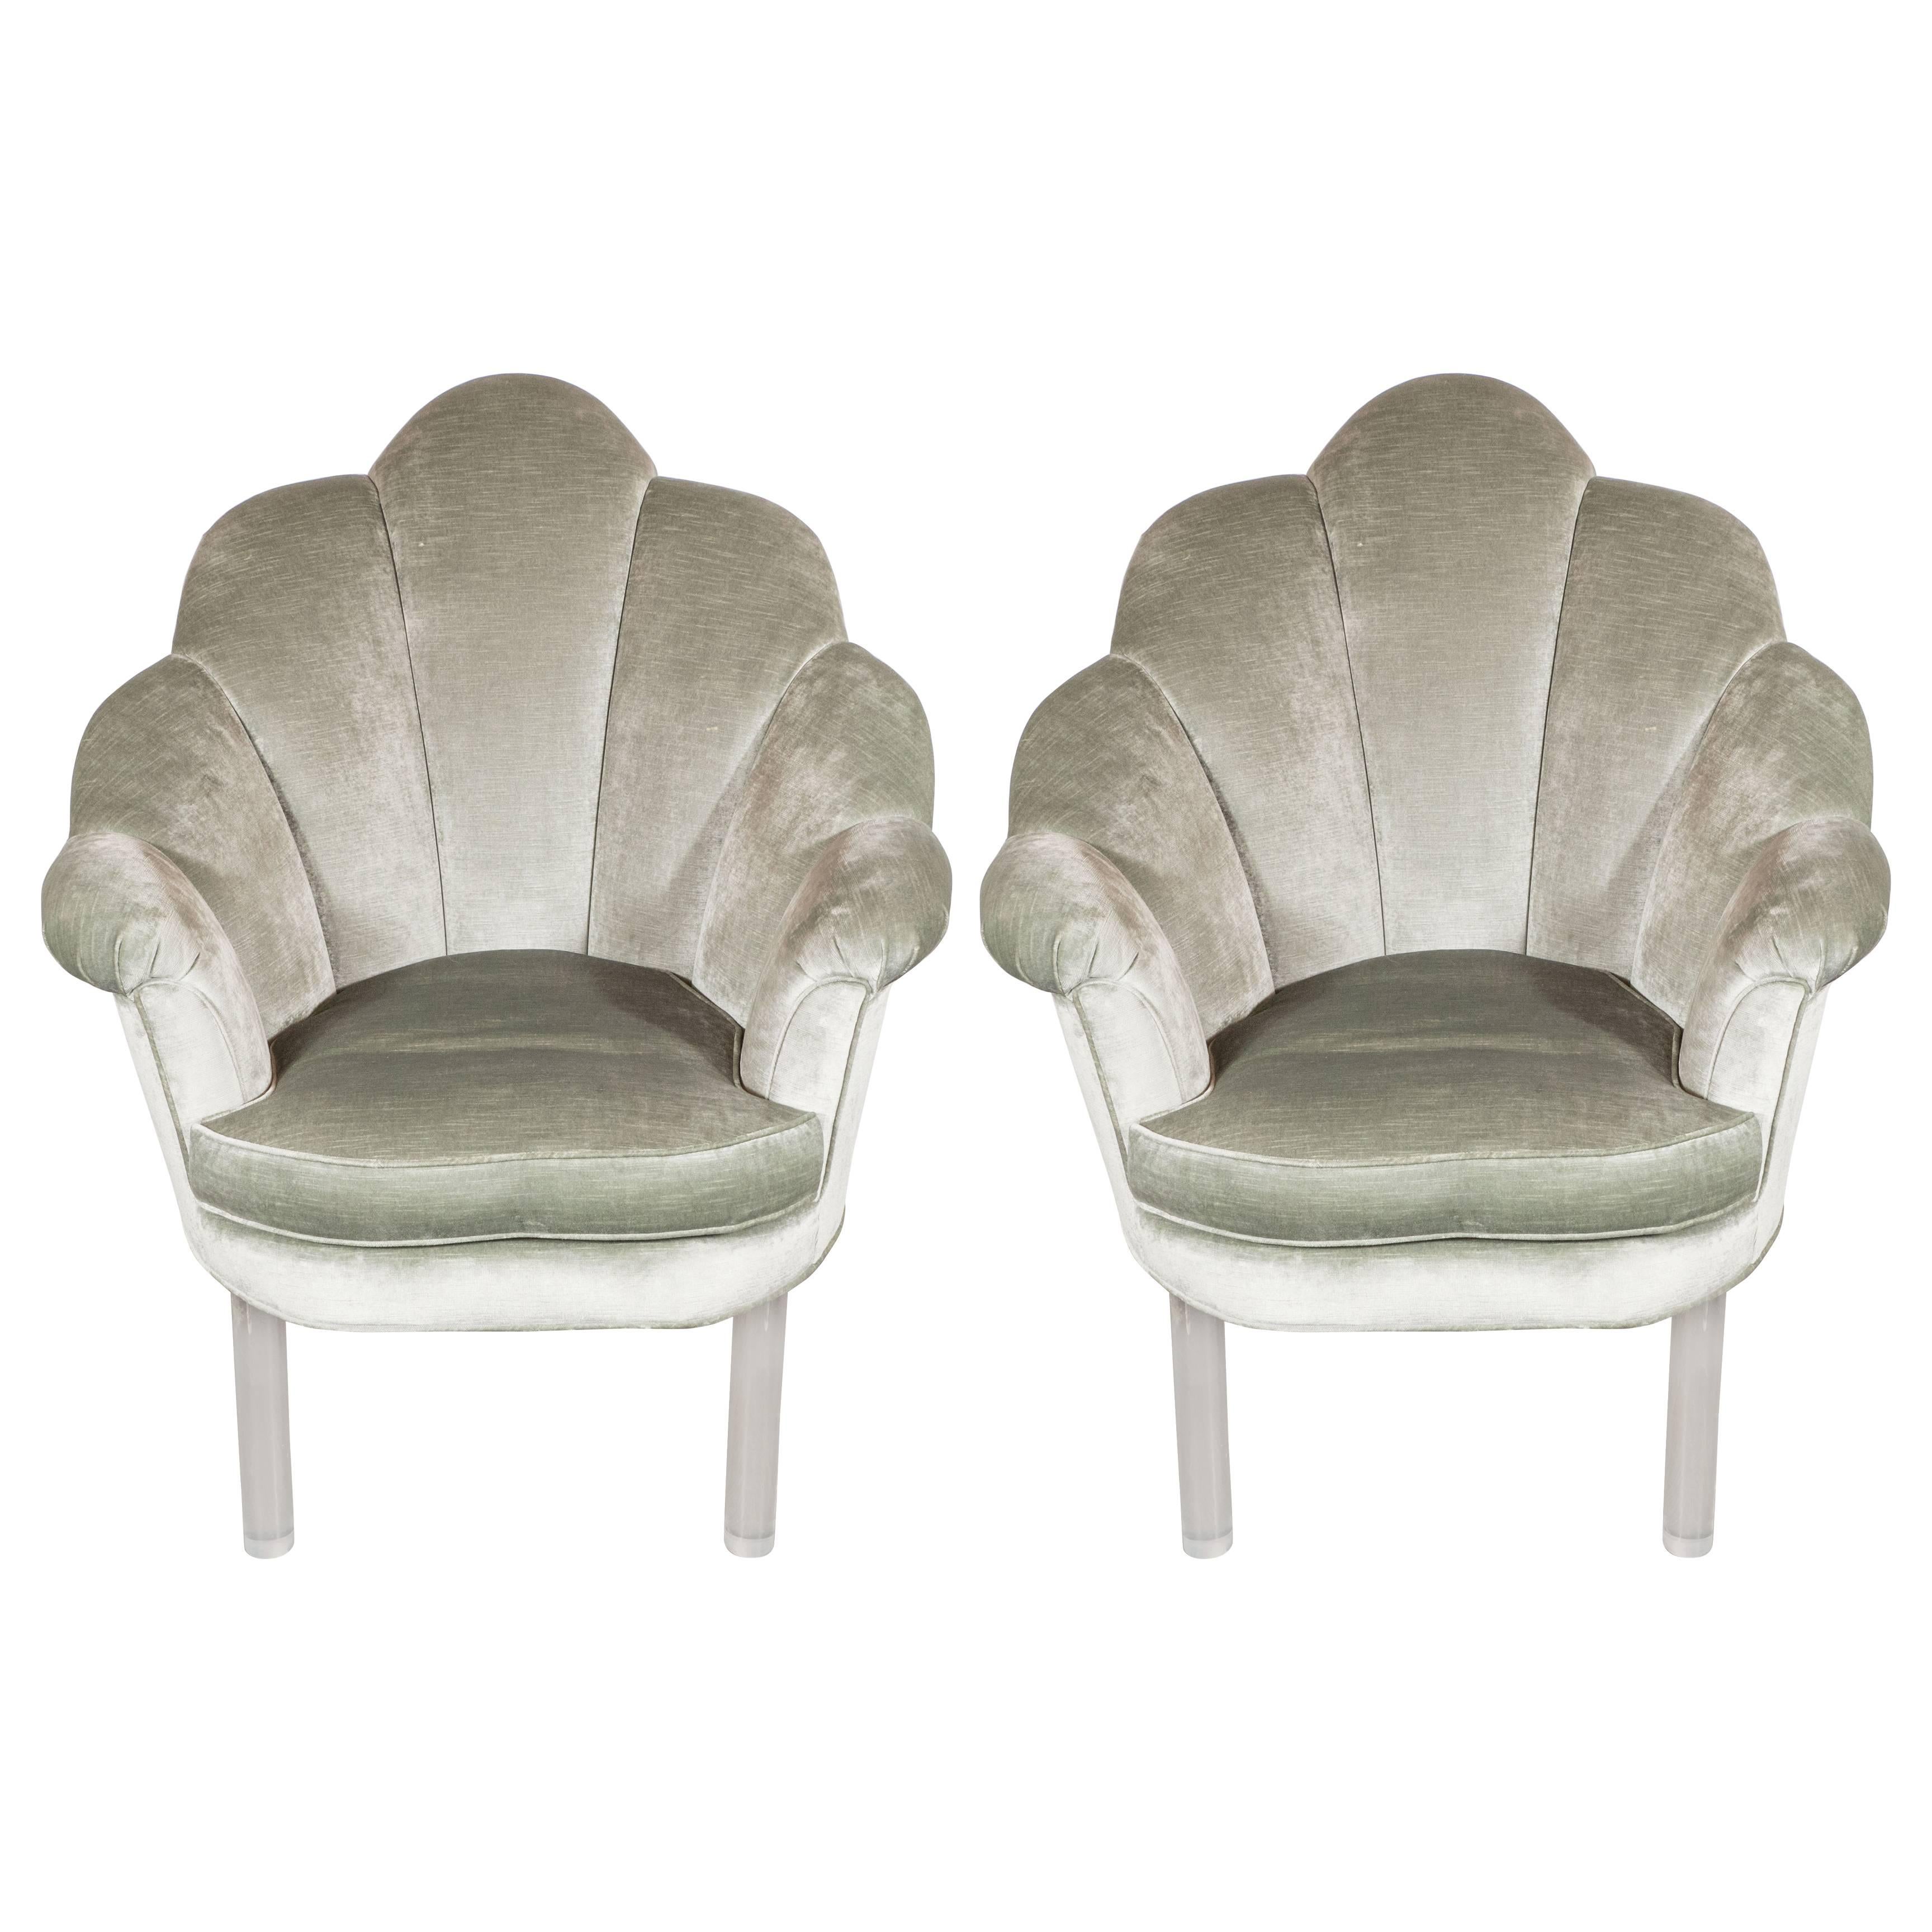 1940s Hollywood Shell Occasional Chairs with Channel Tufting and Lucite Legs